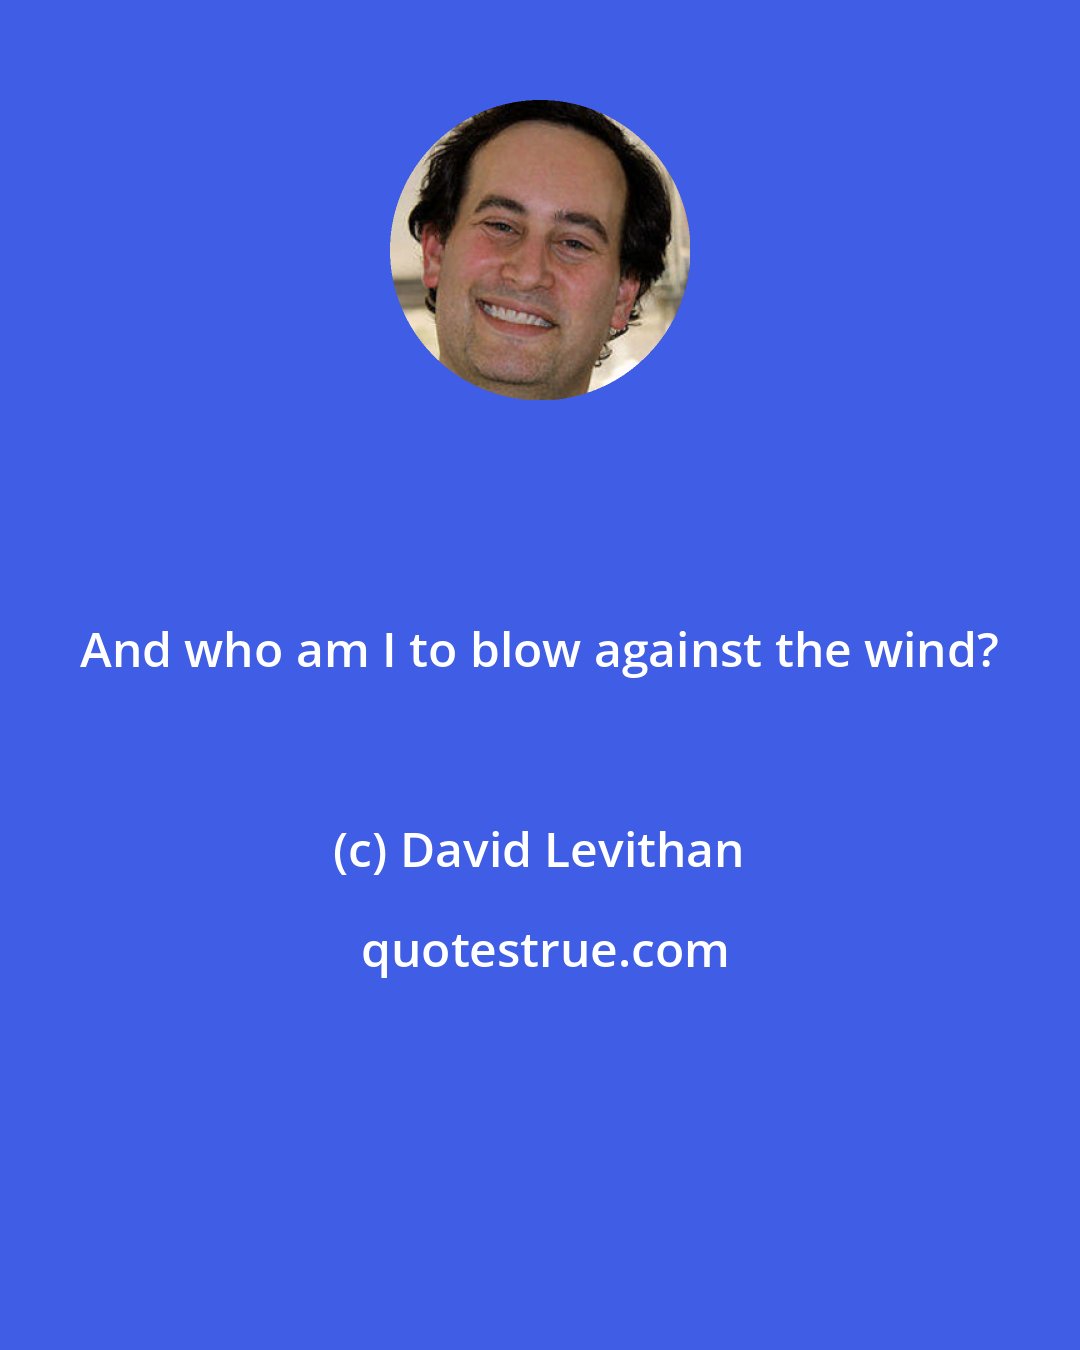 David Levithan: And who am I to blow against the wind?